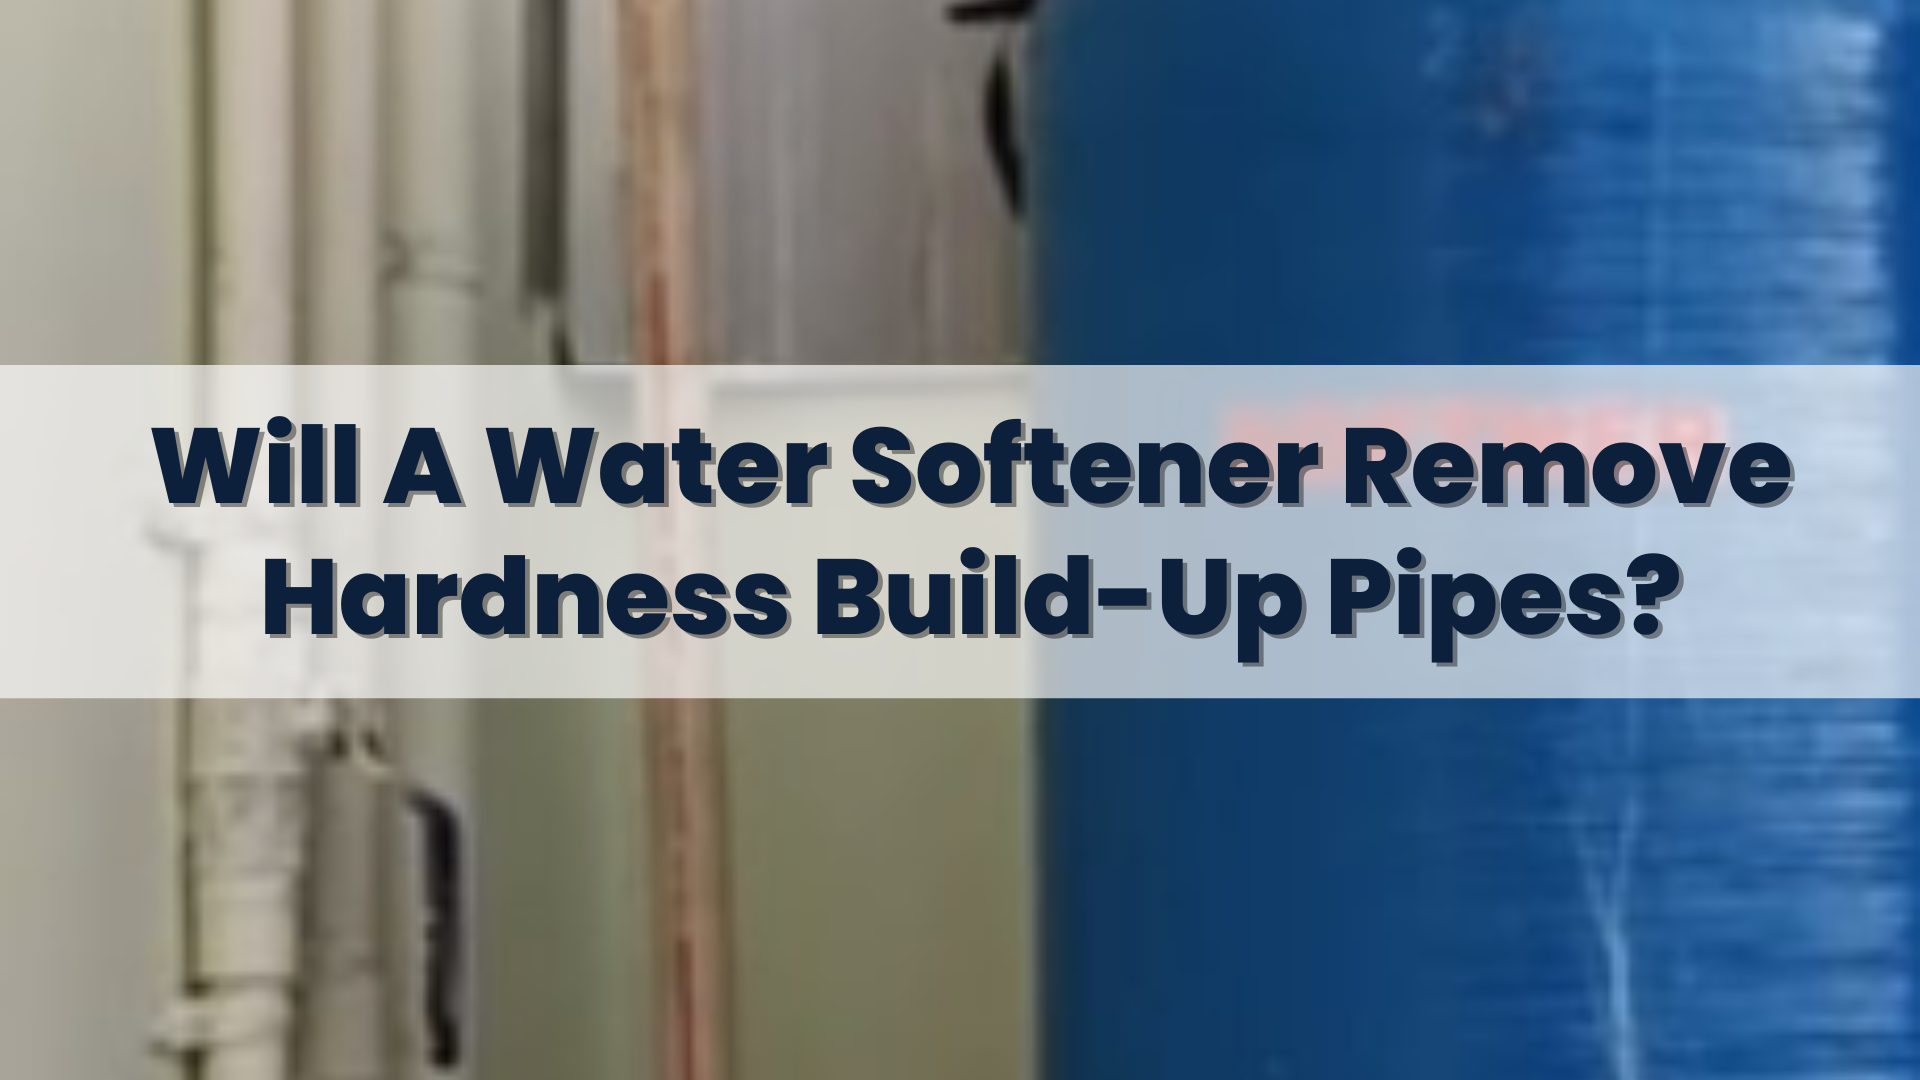 Will A Water Softener Remove Hardness Build-Up Pipes